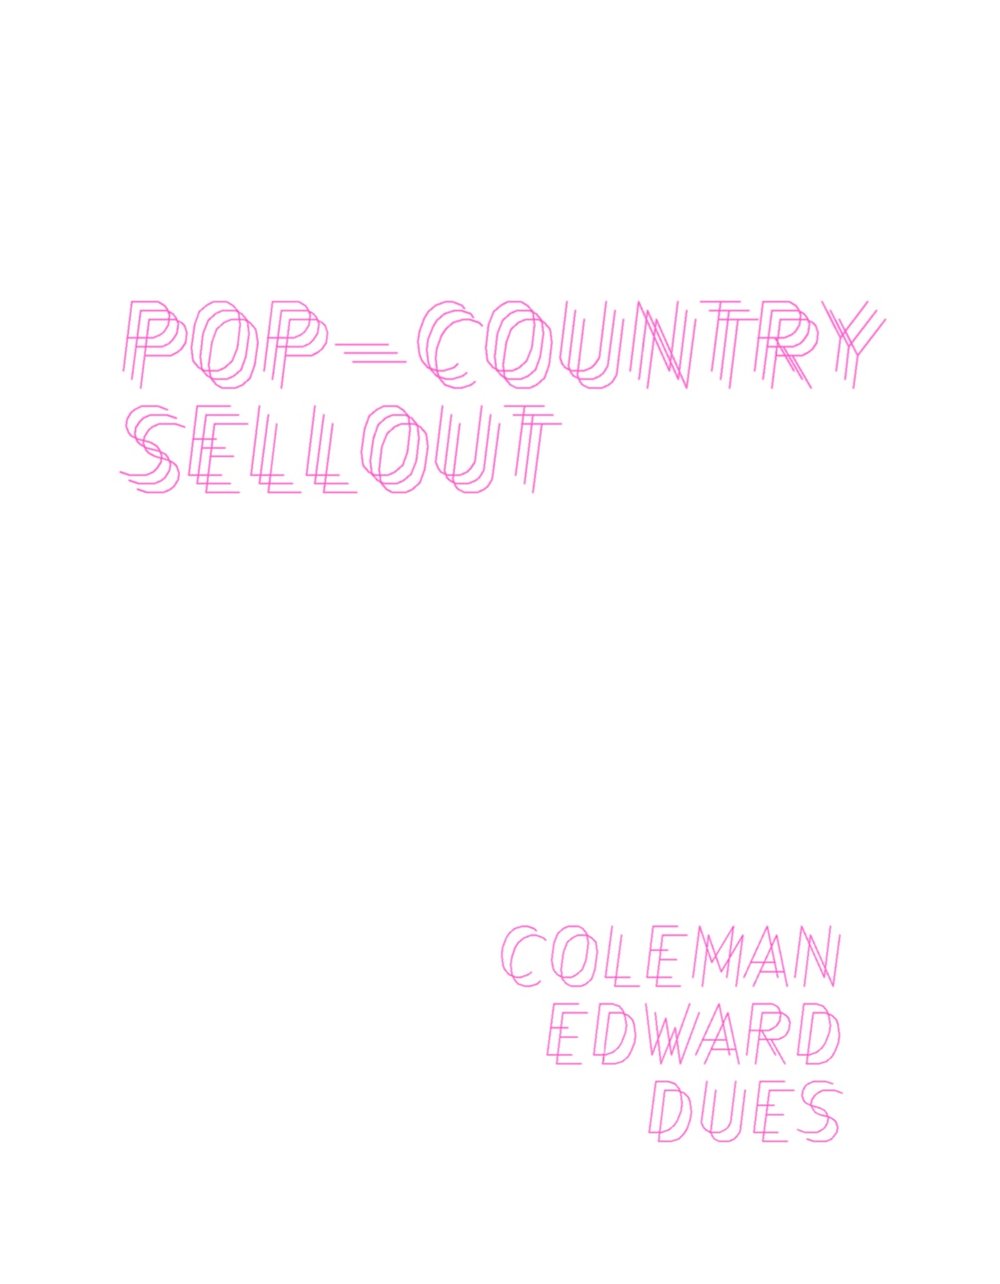 Coleman Edward Dues / Pop - Country Sellout